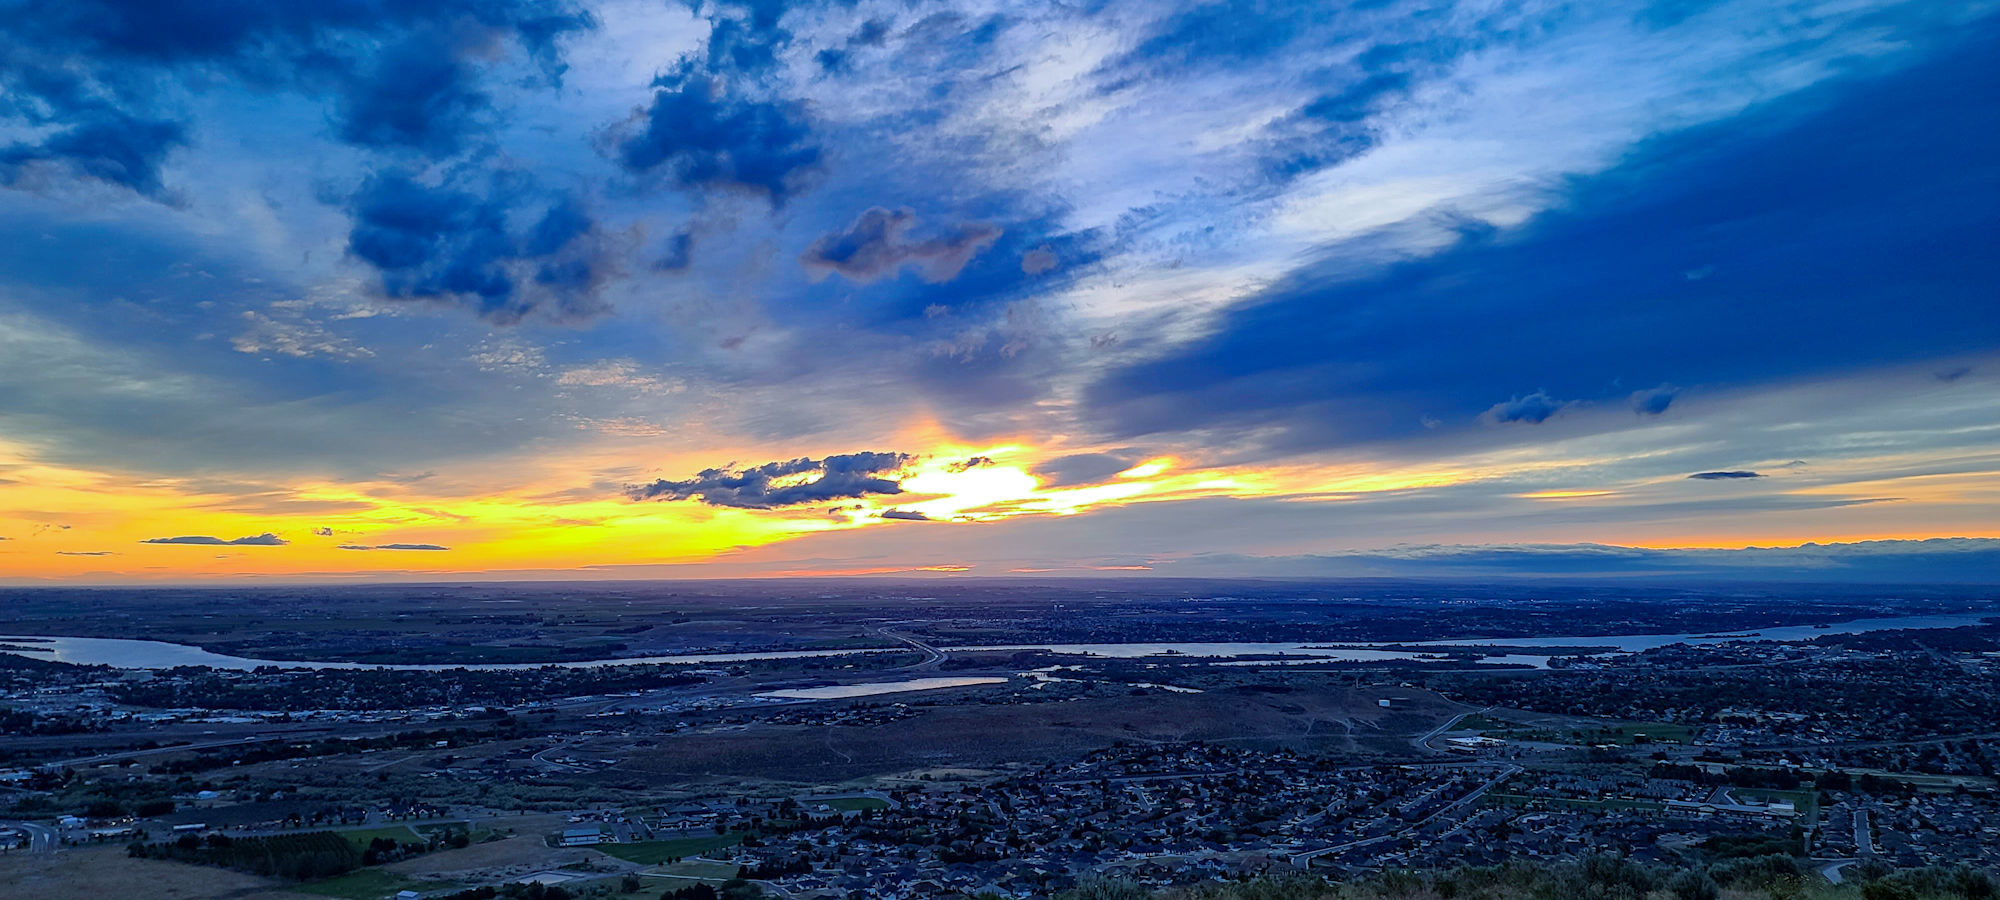 Richland Washington: An Overview and Homes for Sale, Real Estate